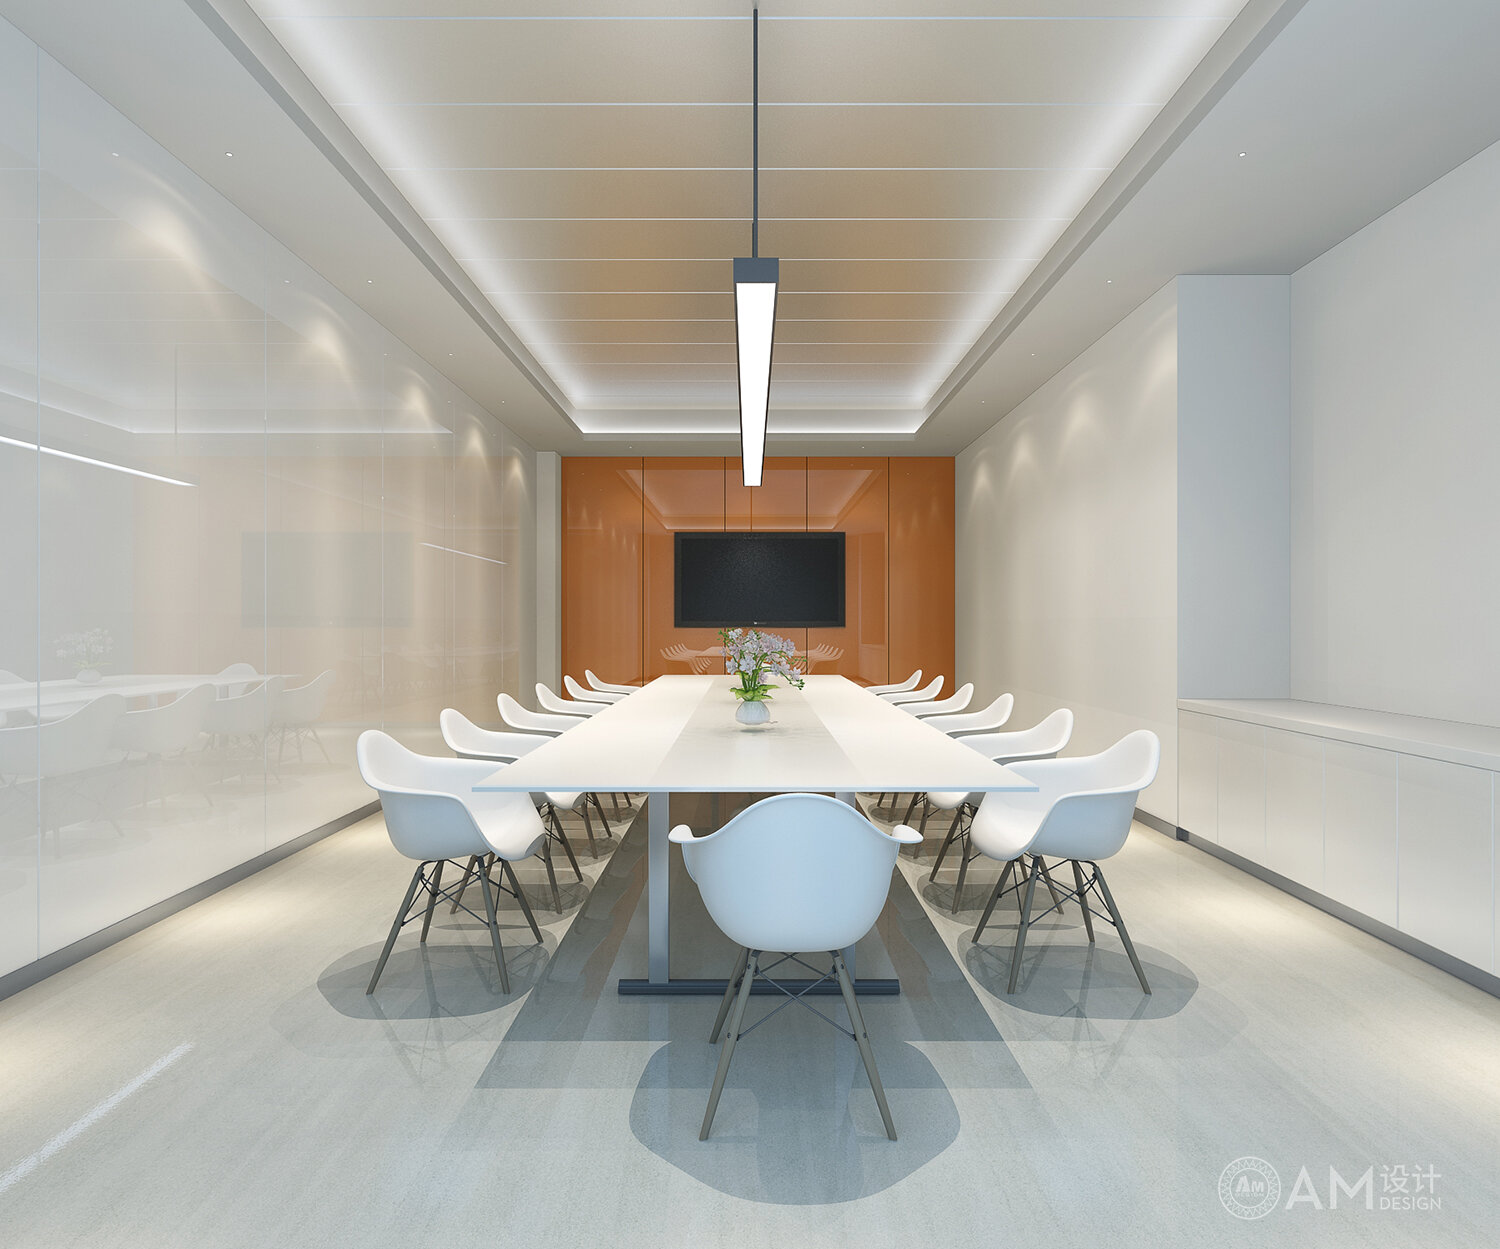 AM DESIGN | Meeting room design for the office building of Beijing Xincheng Thermal Group